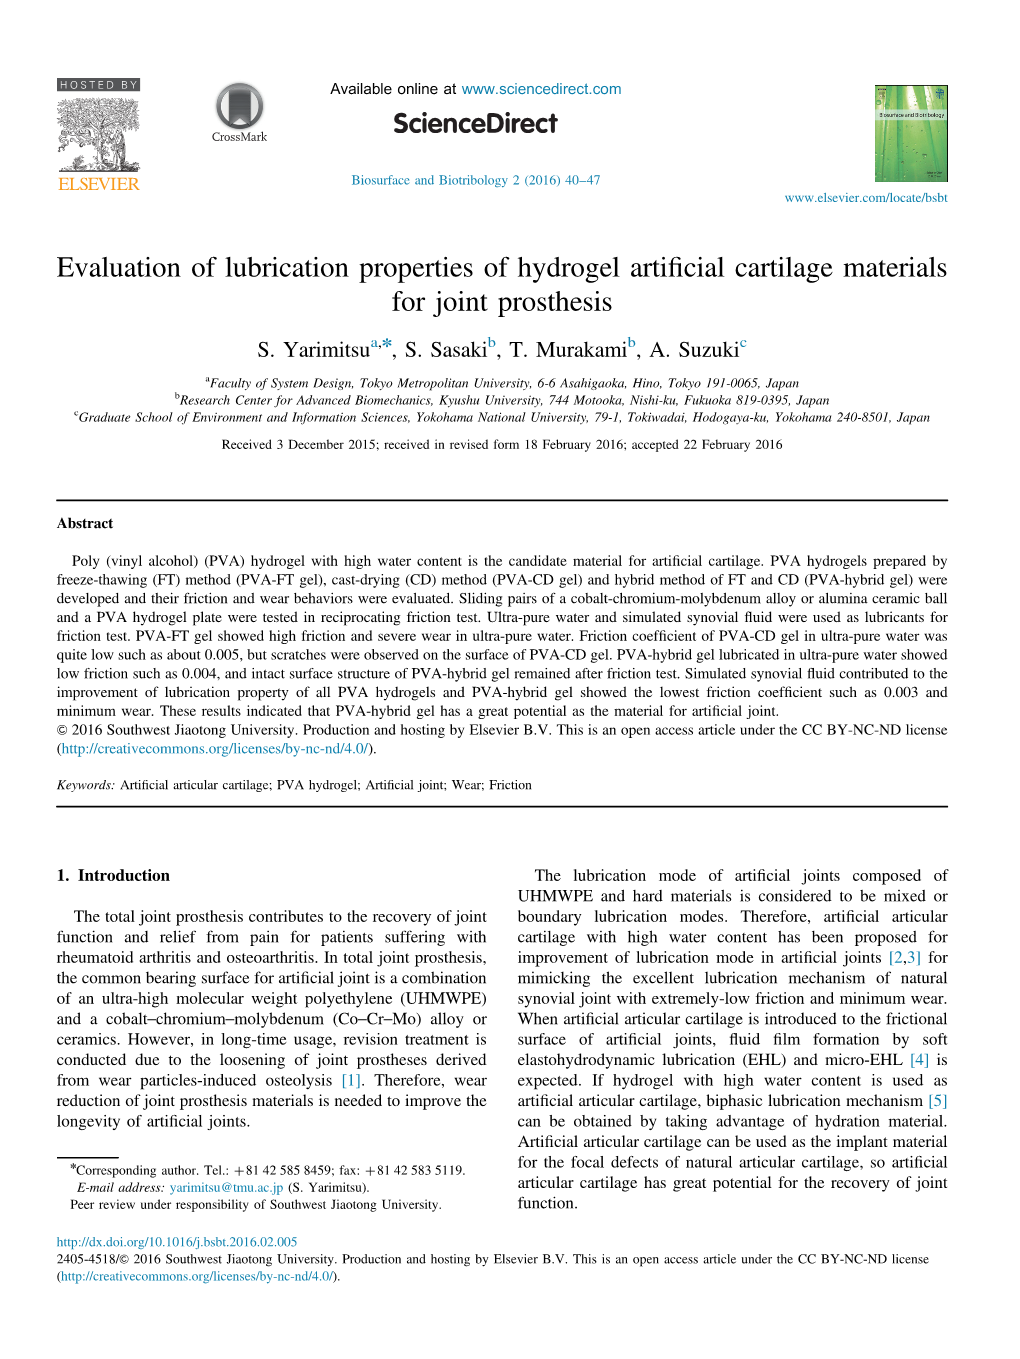 Evaluation of Lubrication Properties of Hydrogel Artificial Cartilage